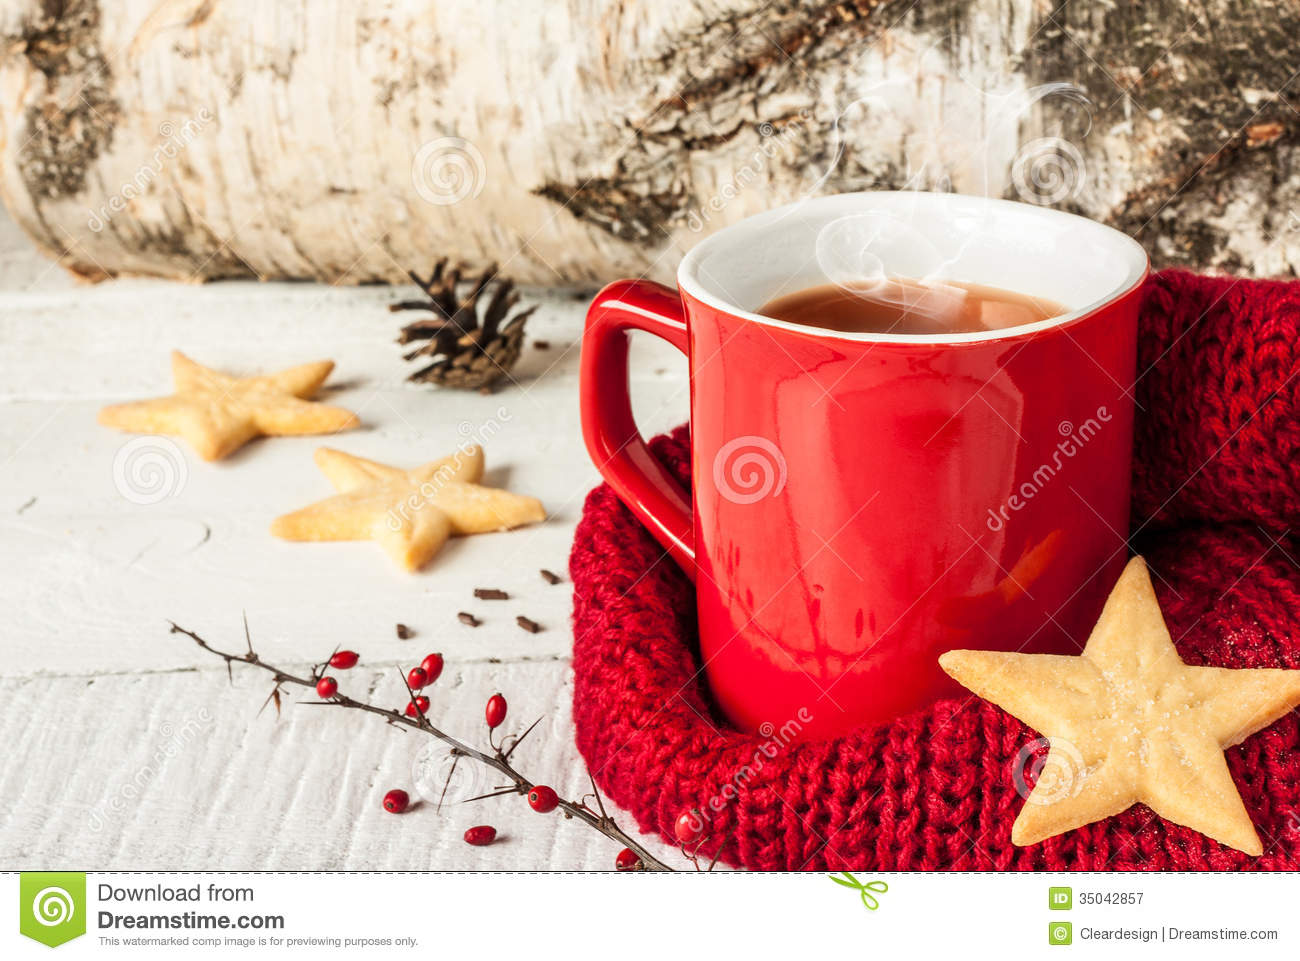 Hot Winter Tea In A Red Mug With Christmas Cookies Royalty Free Stock